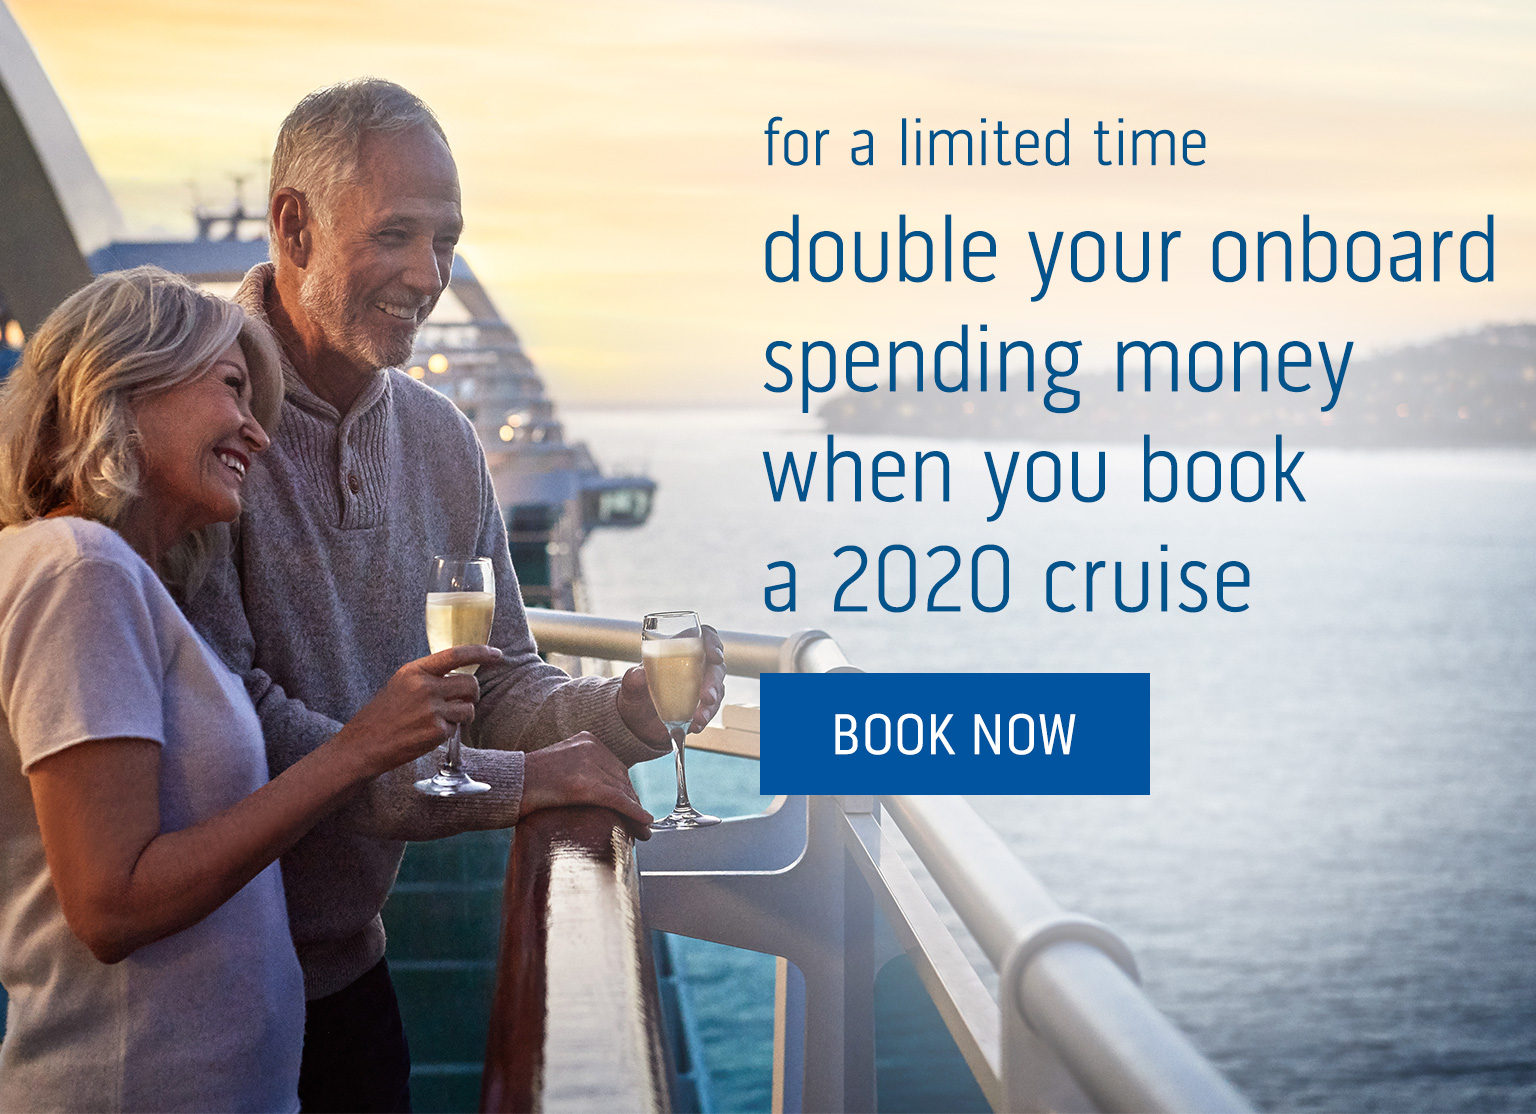 Big Future Cruise Deposit offer on 2020 cruises with Princess!